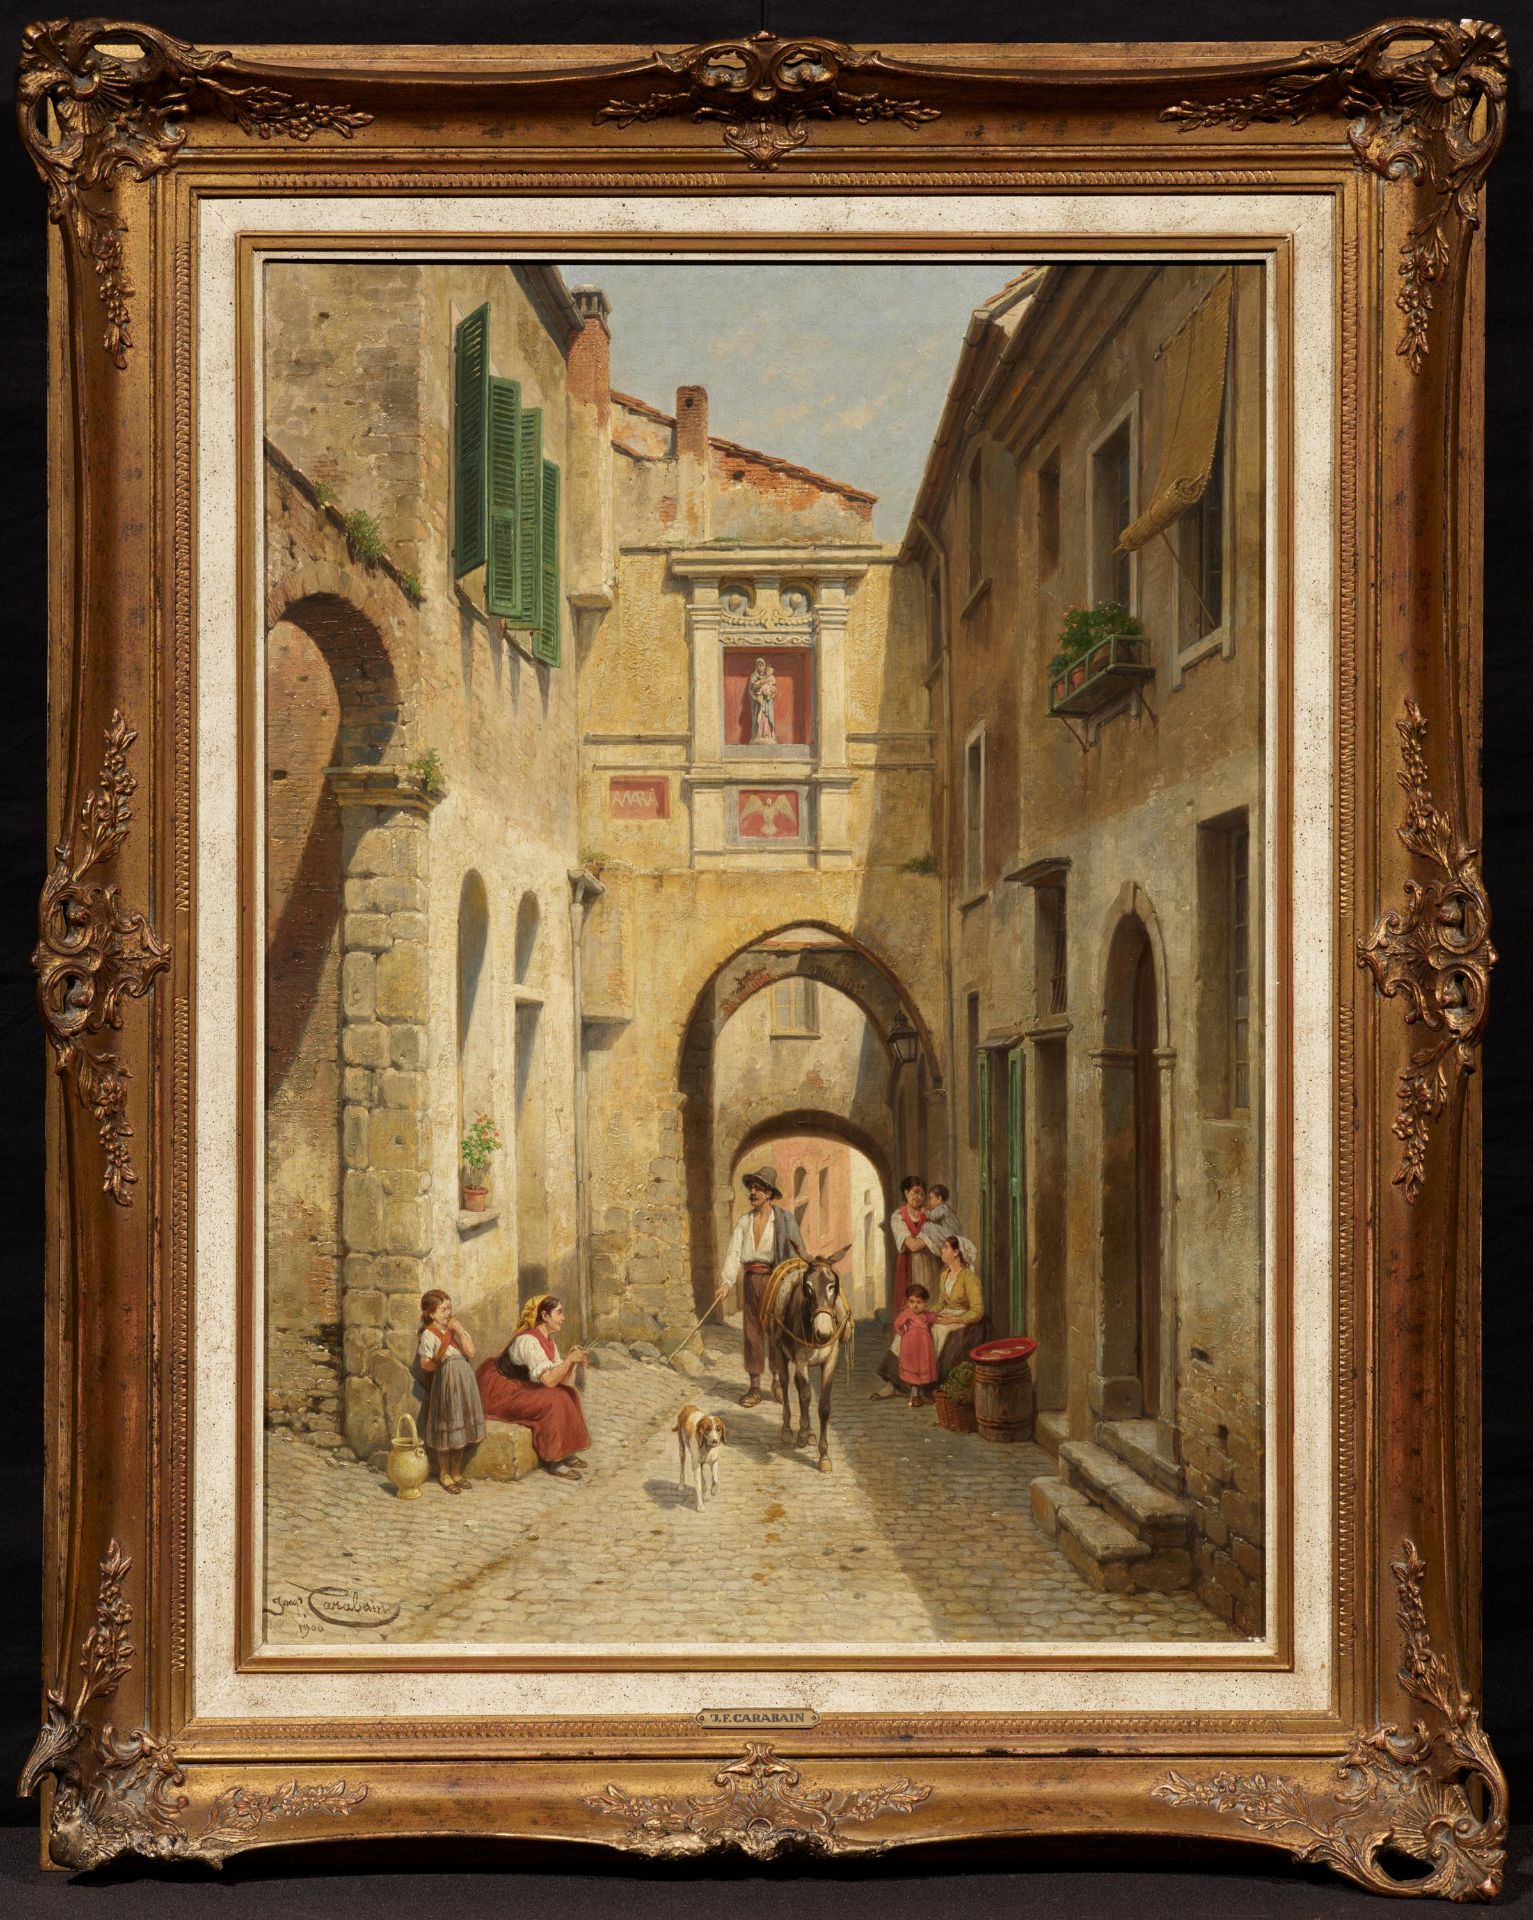 Jacques Francois Carabain: Italian Alleys in Taggia in Liguria - Image 2 of 3